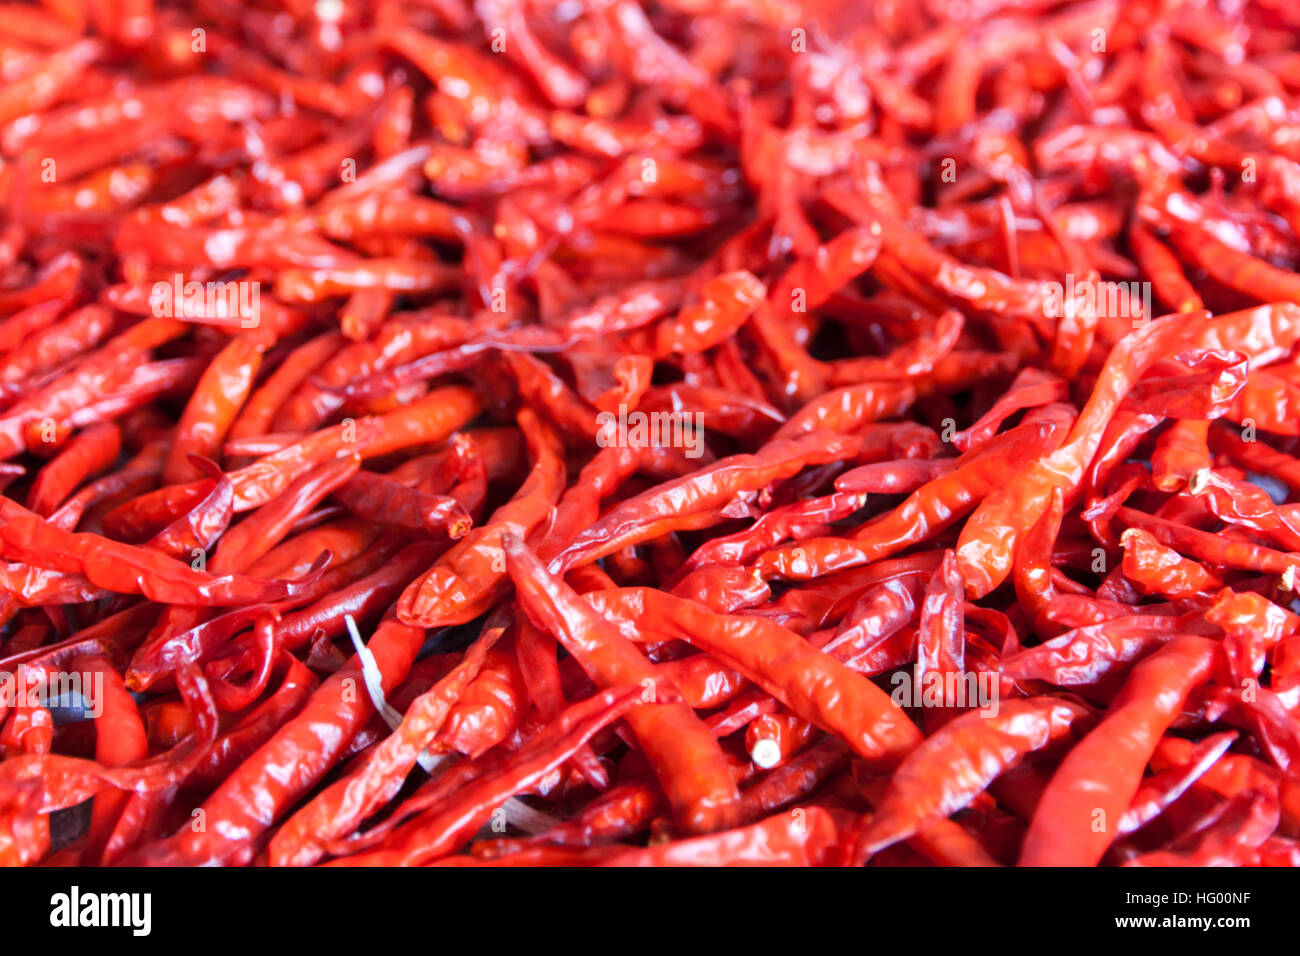 Dried red chili pepper spice with the sun. The food to be stored longer. Stock Photo